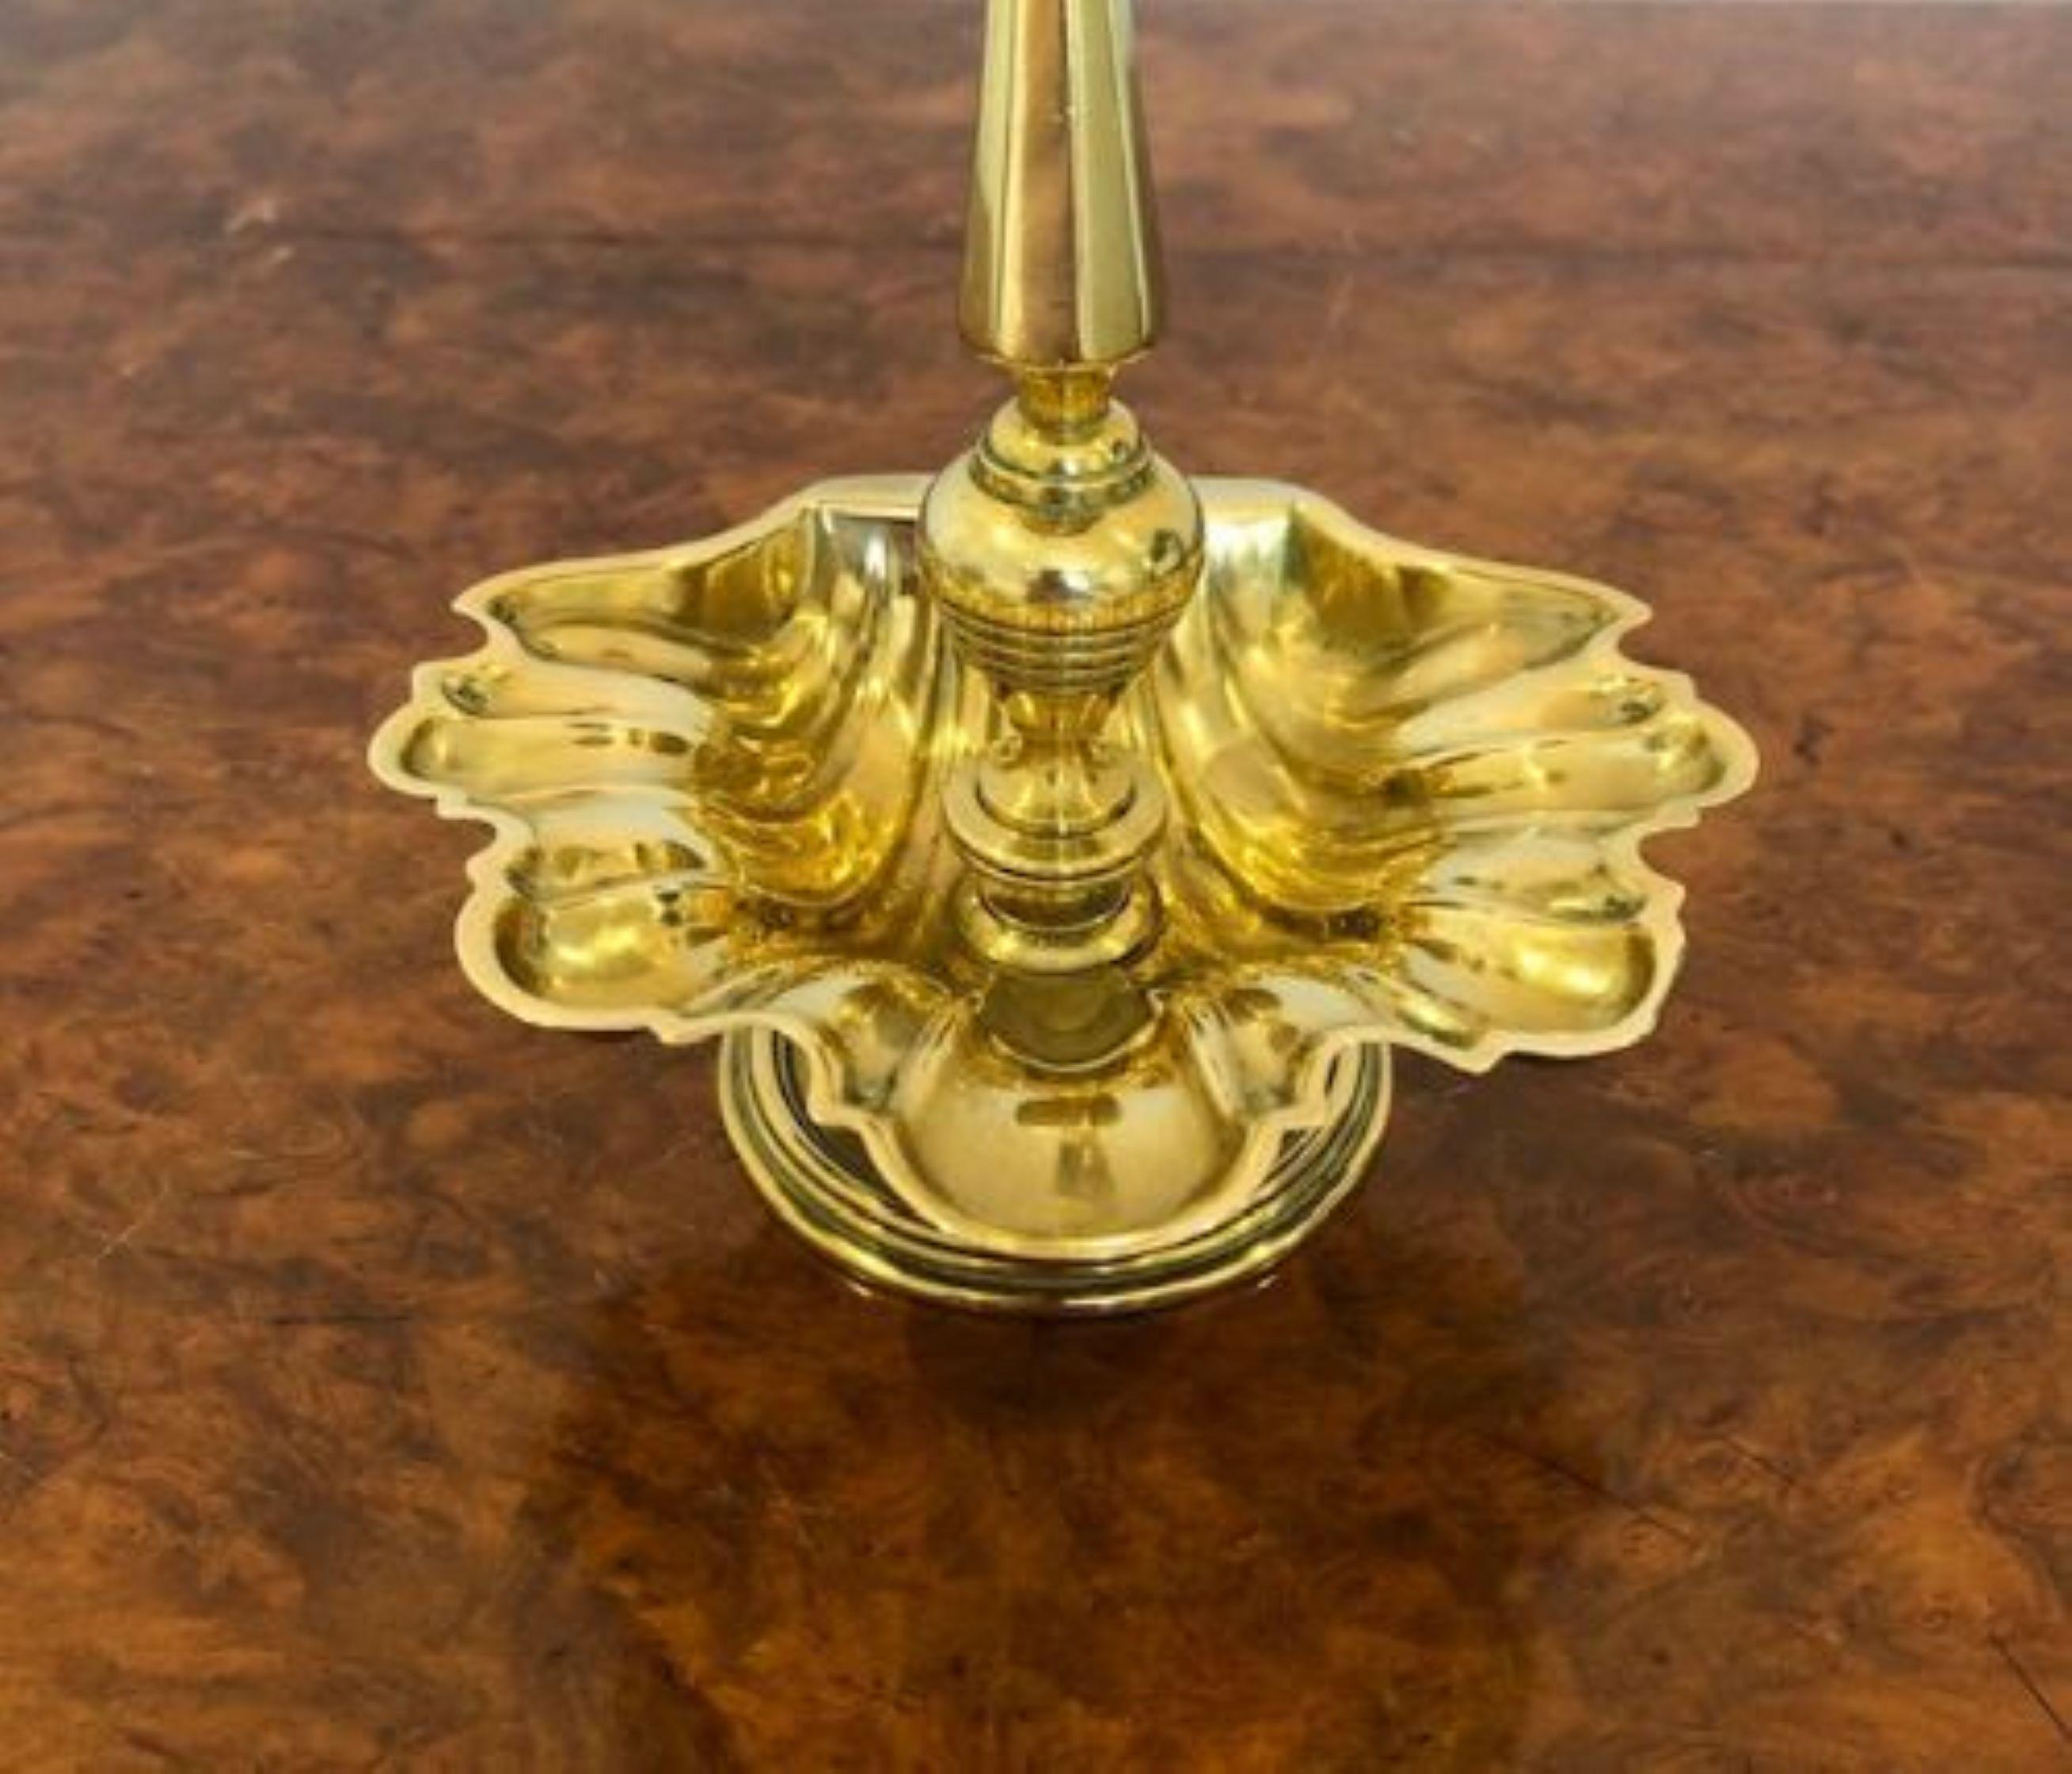 Unusual Pair of Antique Brass Candlesticks In Good Condition For Sale In Ipswich, GB